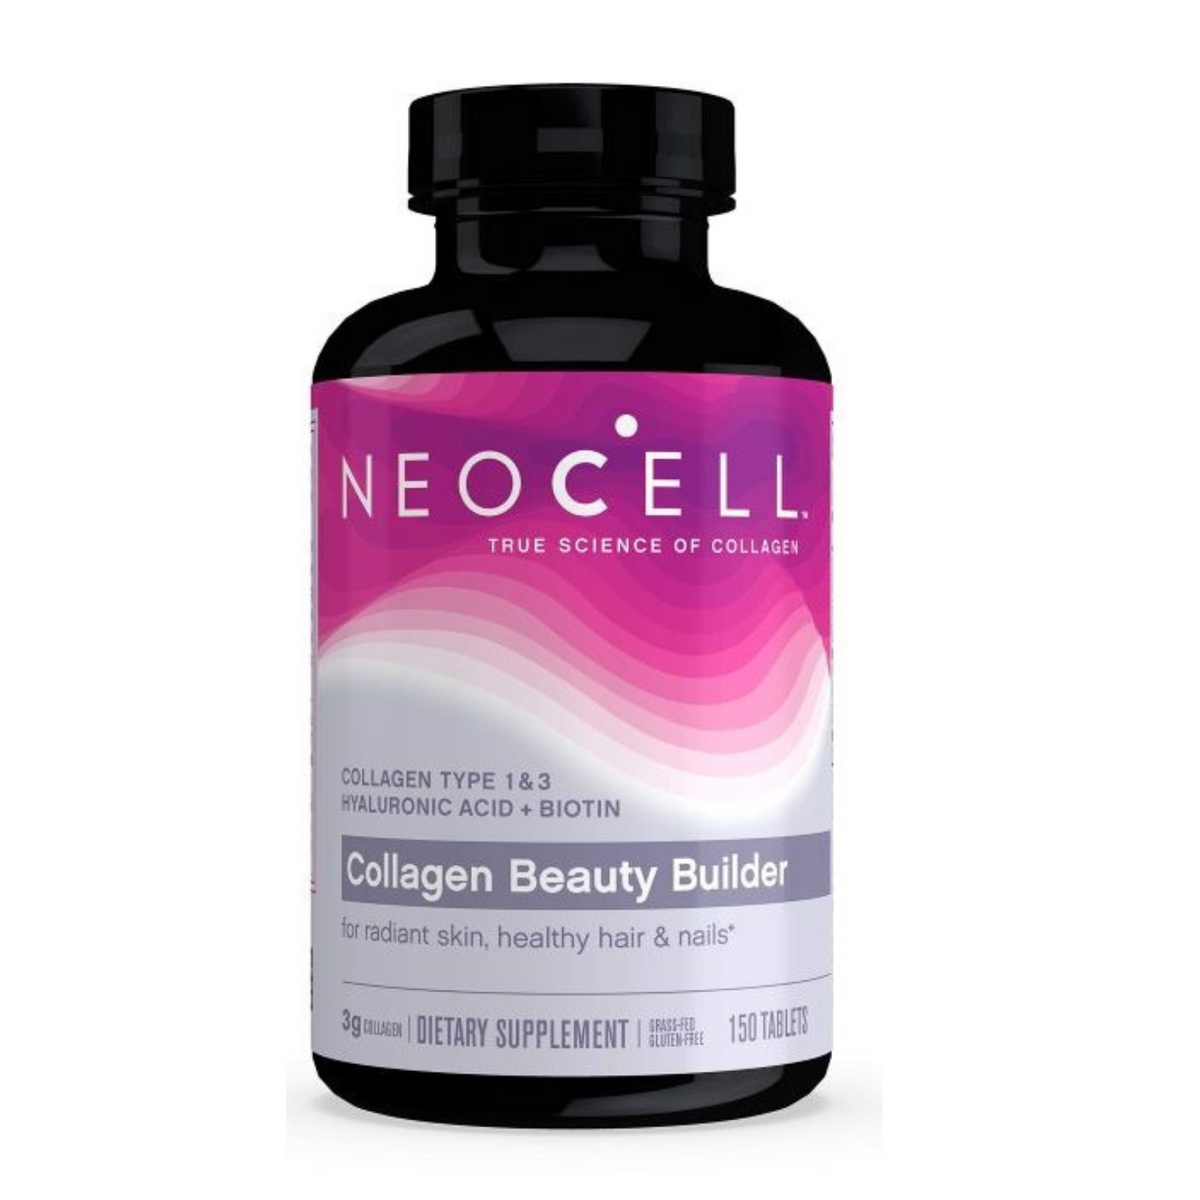 Collagen Beauty Builder by NeoCell - 150 tablets